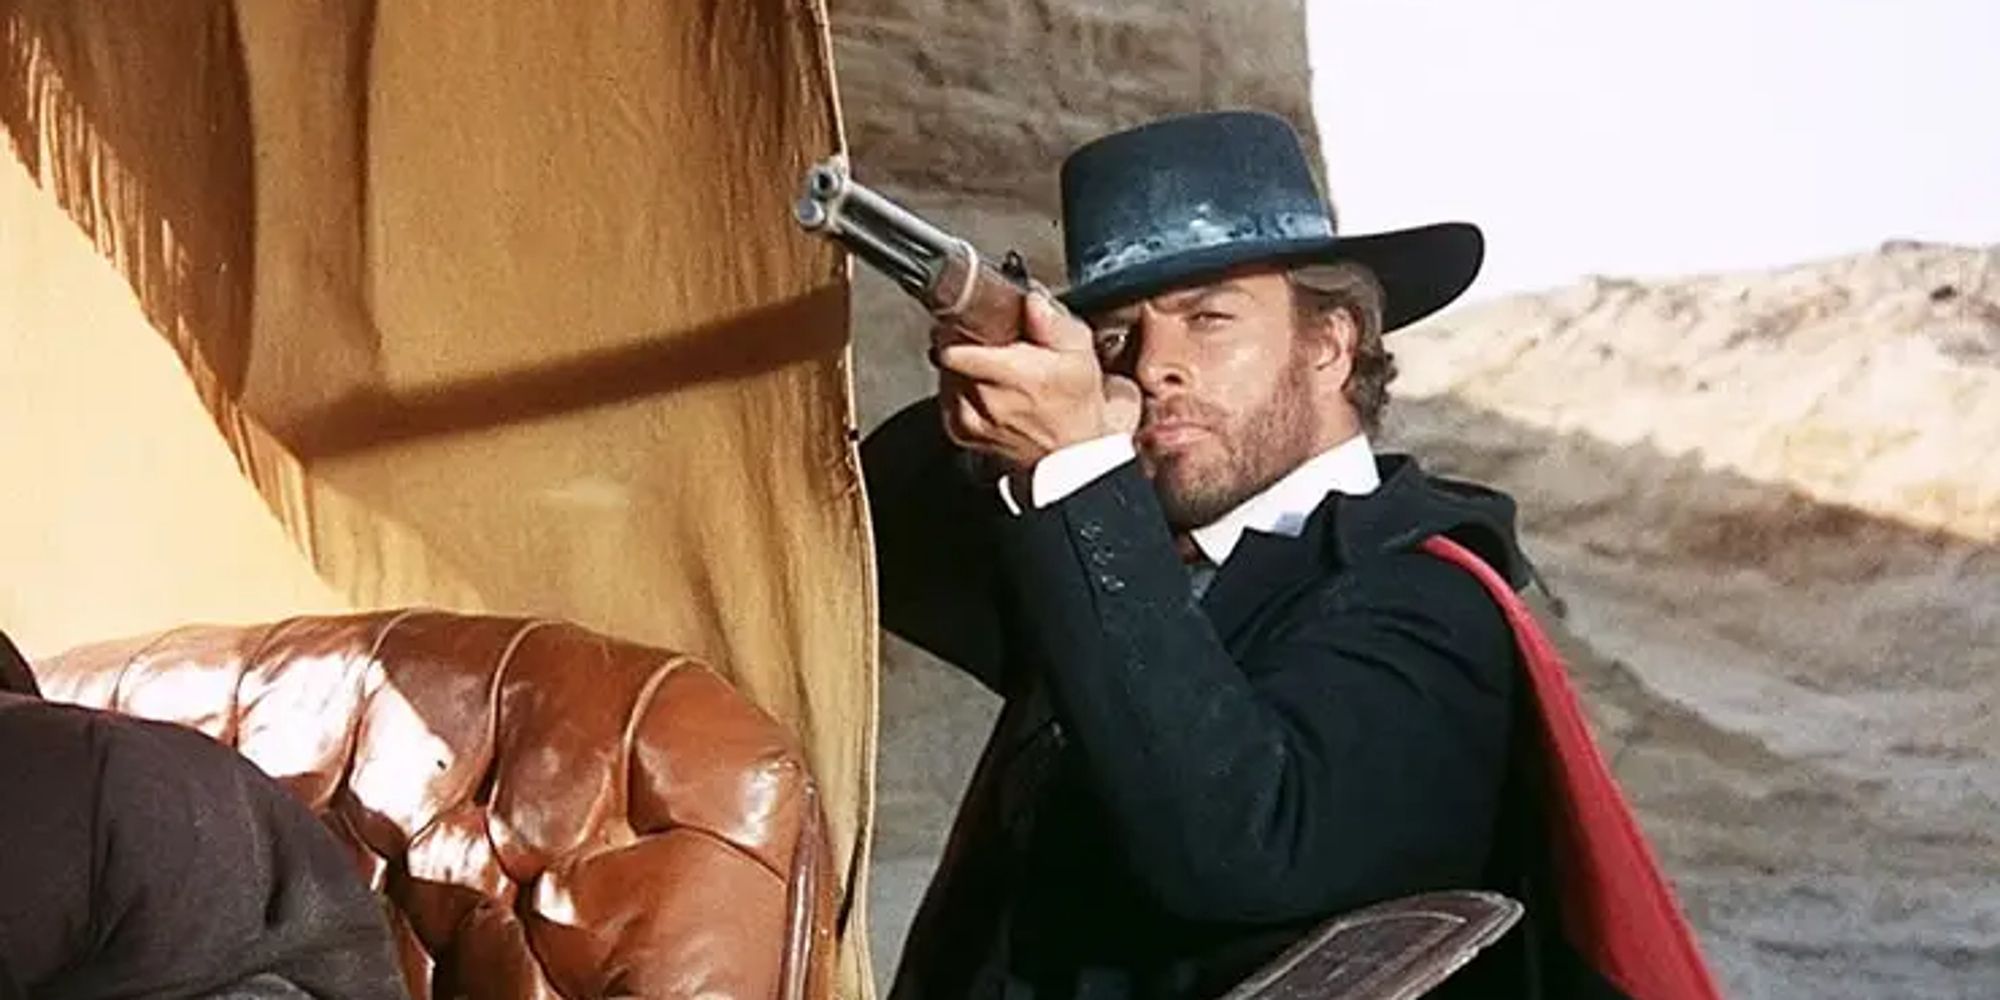 A gun-toting vigilante aims a rifle while standing on the back of a carriage.